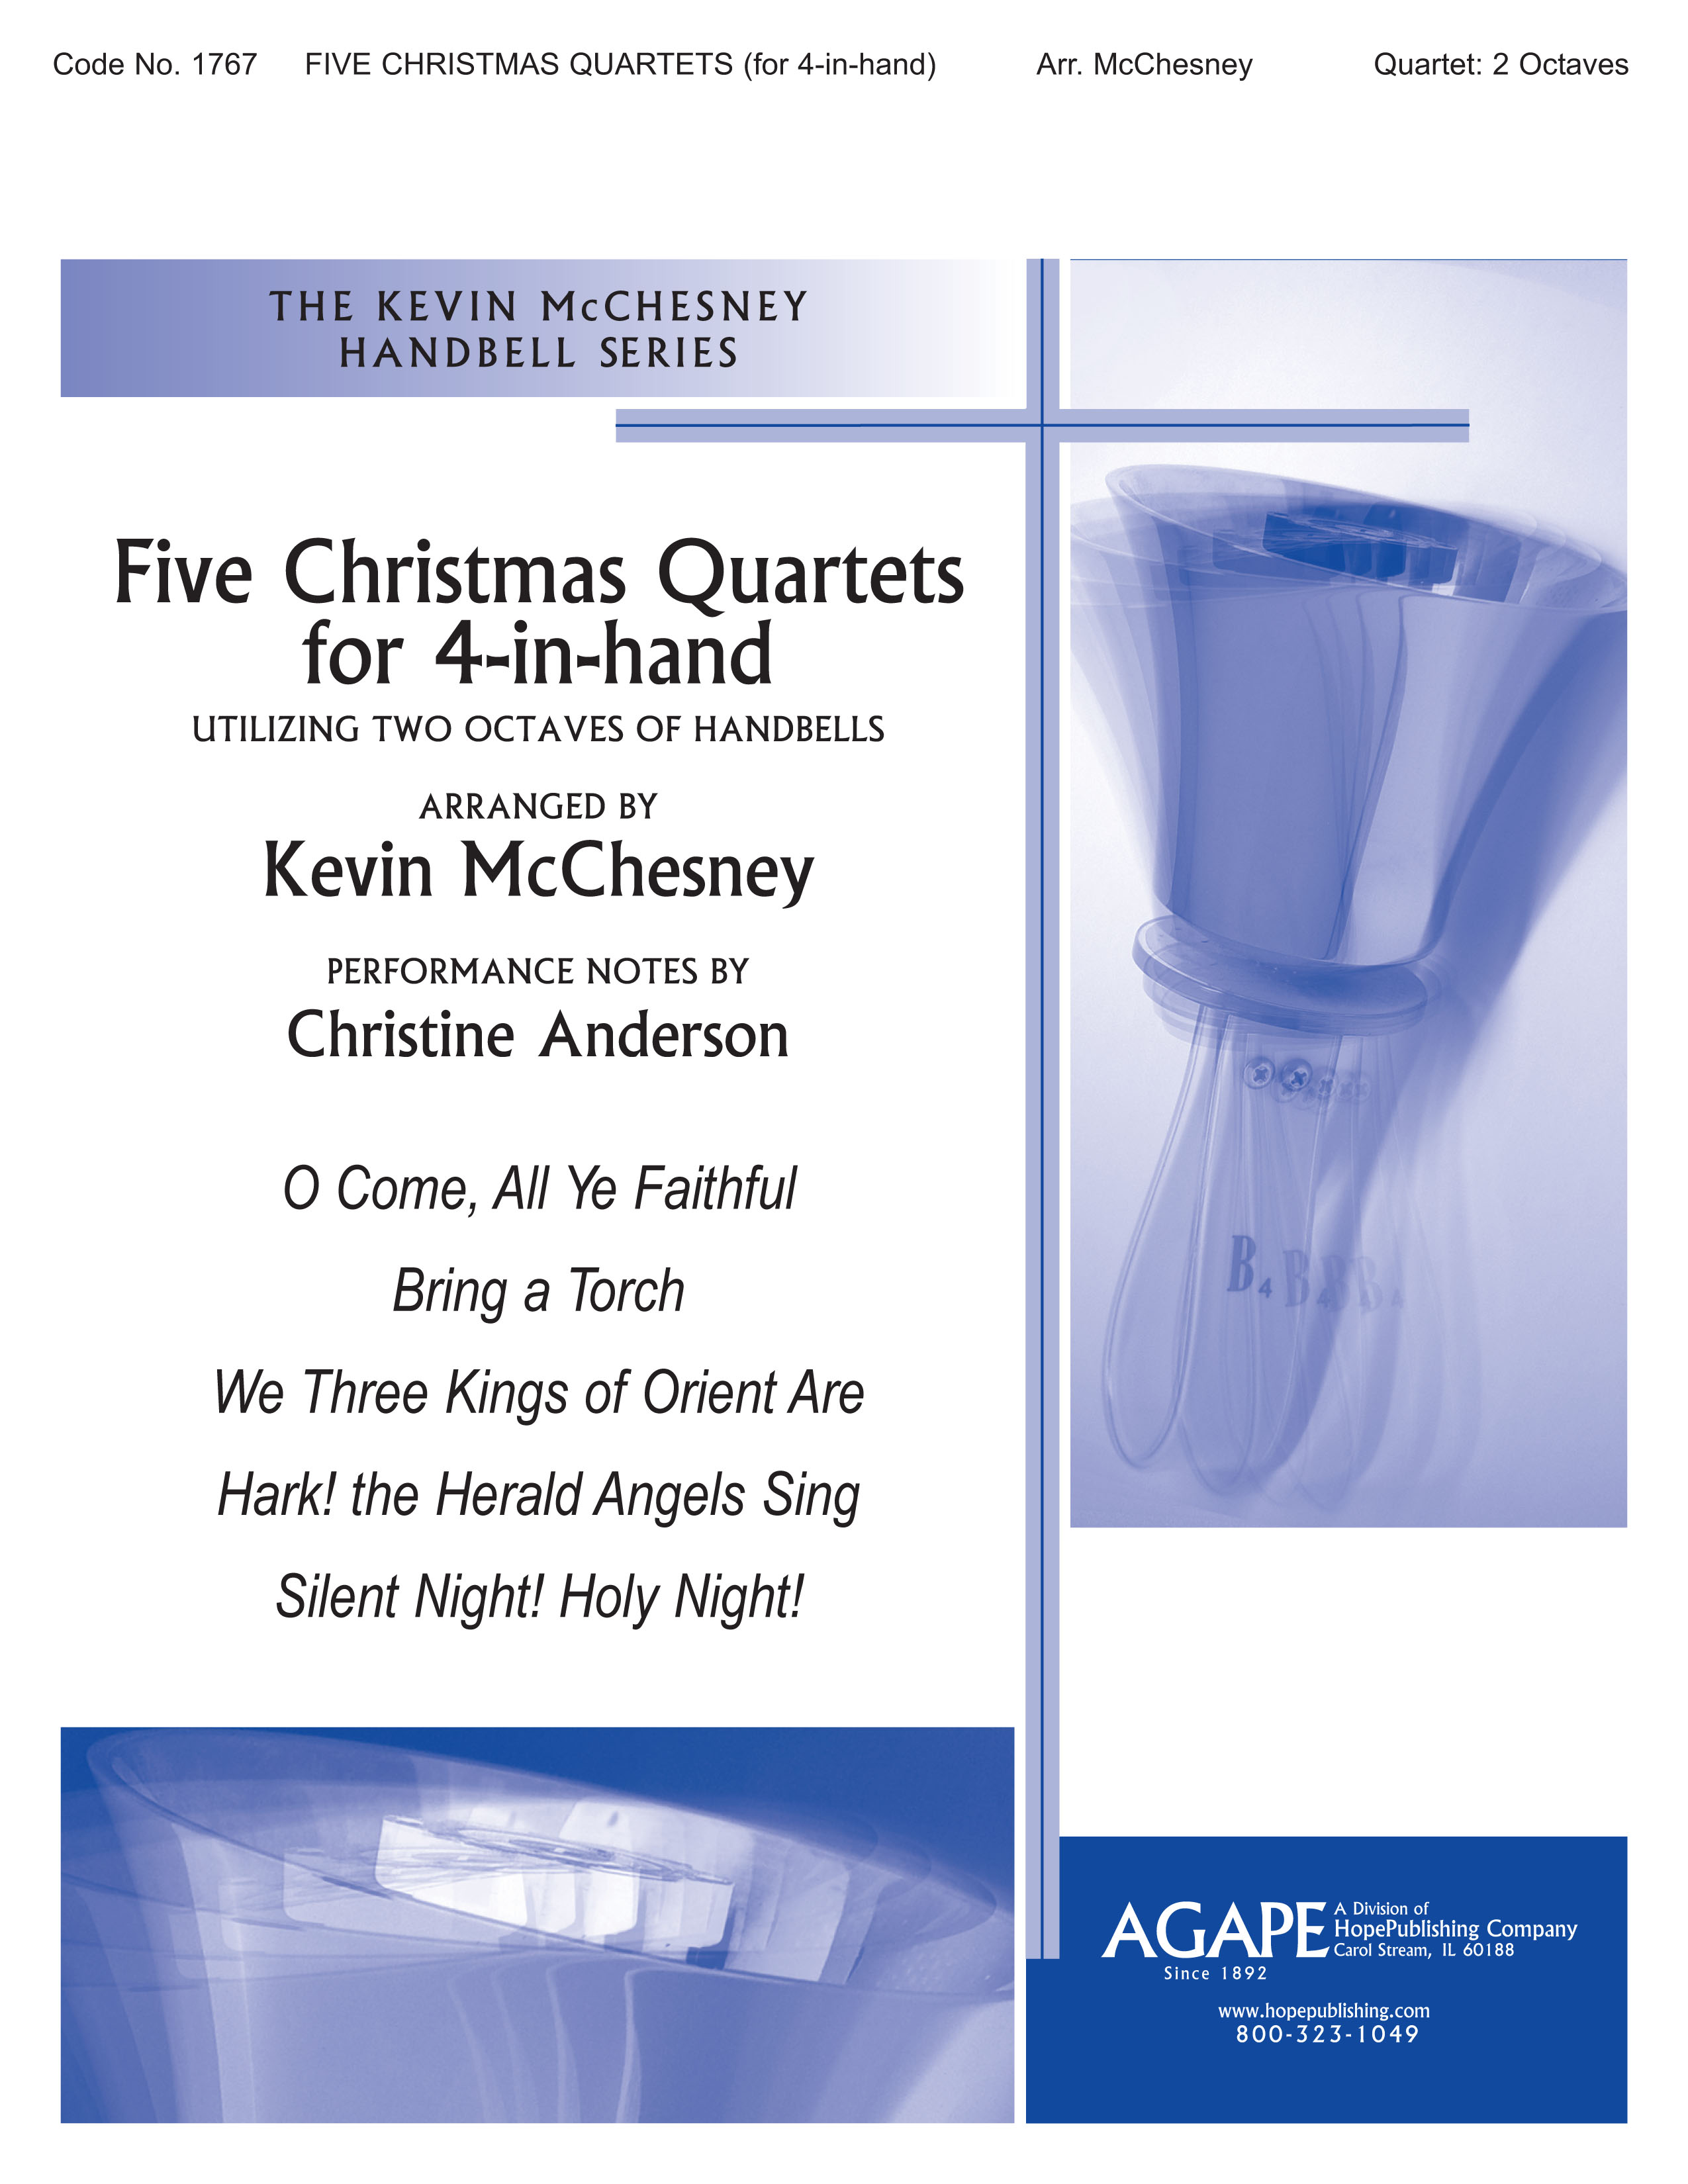 Five Christmas Quartets for 4-in-Hand - Collection Cover Image